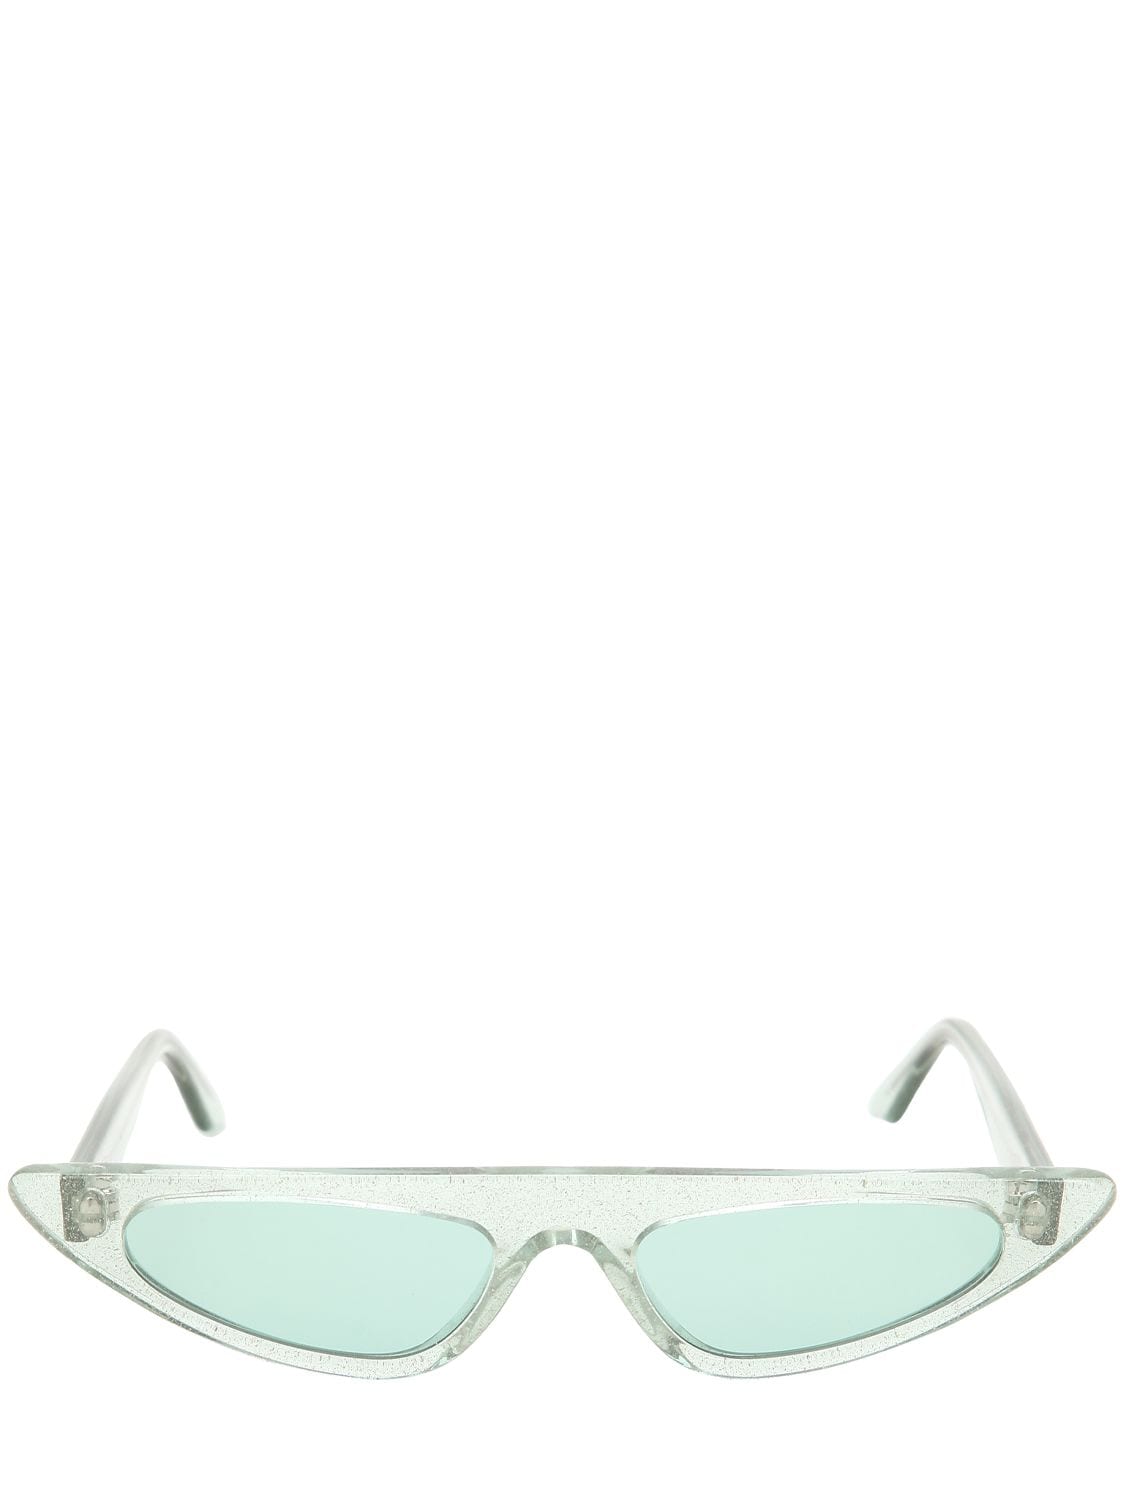 ANDY WOLF Florence Cat-eye Sunglasses